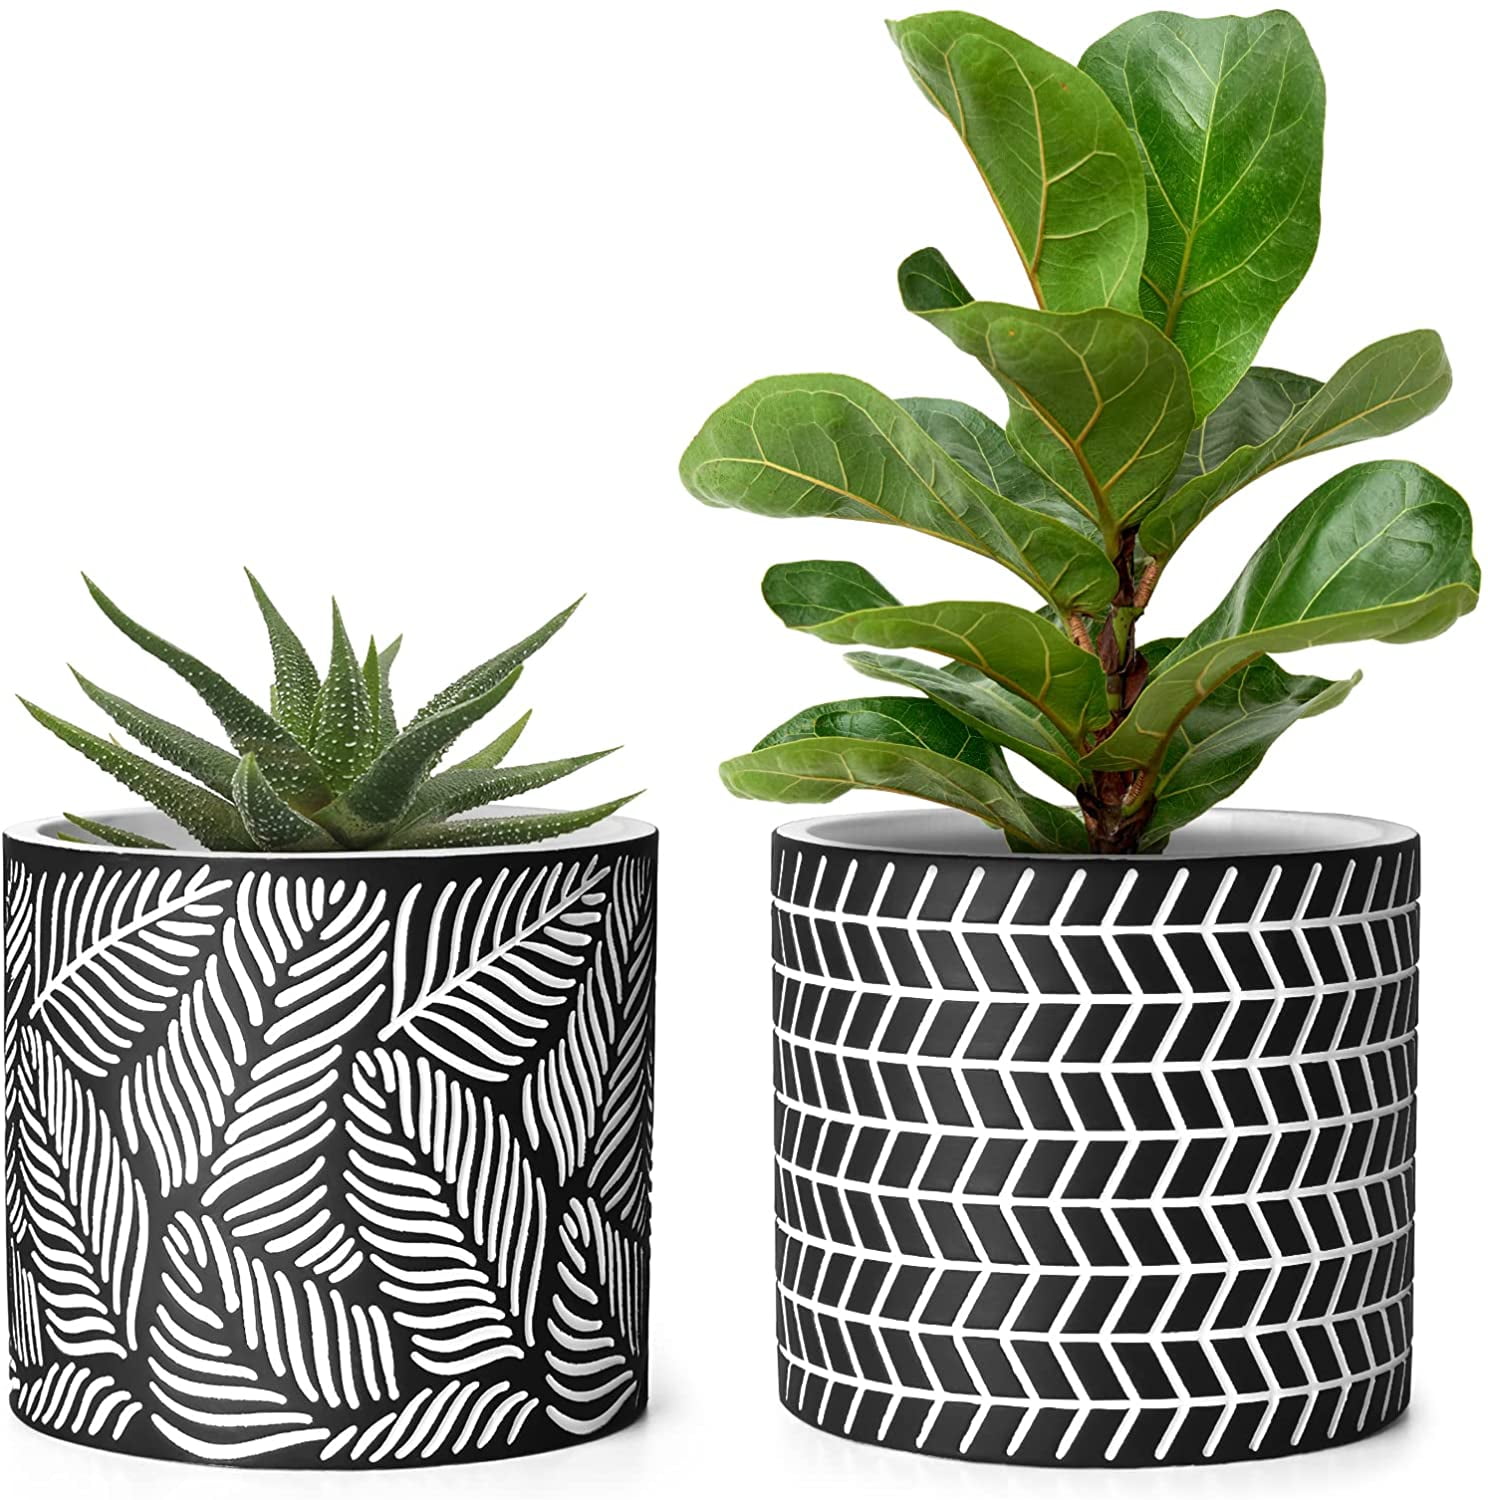 5 Inch Concrete Succulent Flowerpot Bonsai Container with Drainage Holes POTEY 054904, Set of 2, Plant NOT Included Cement Planters Pots for Plants Indoor 